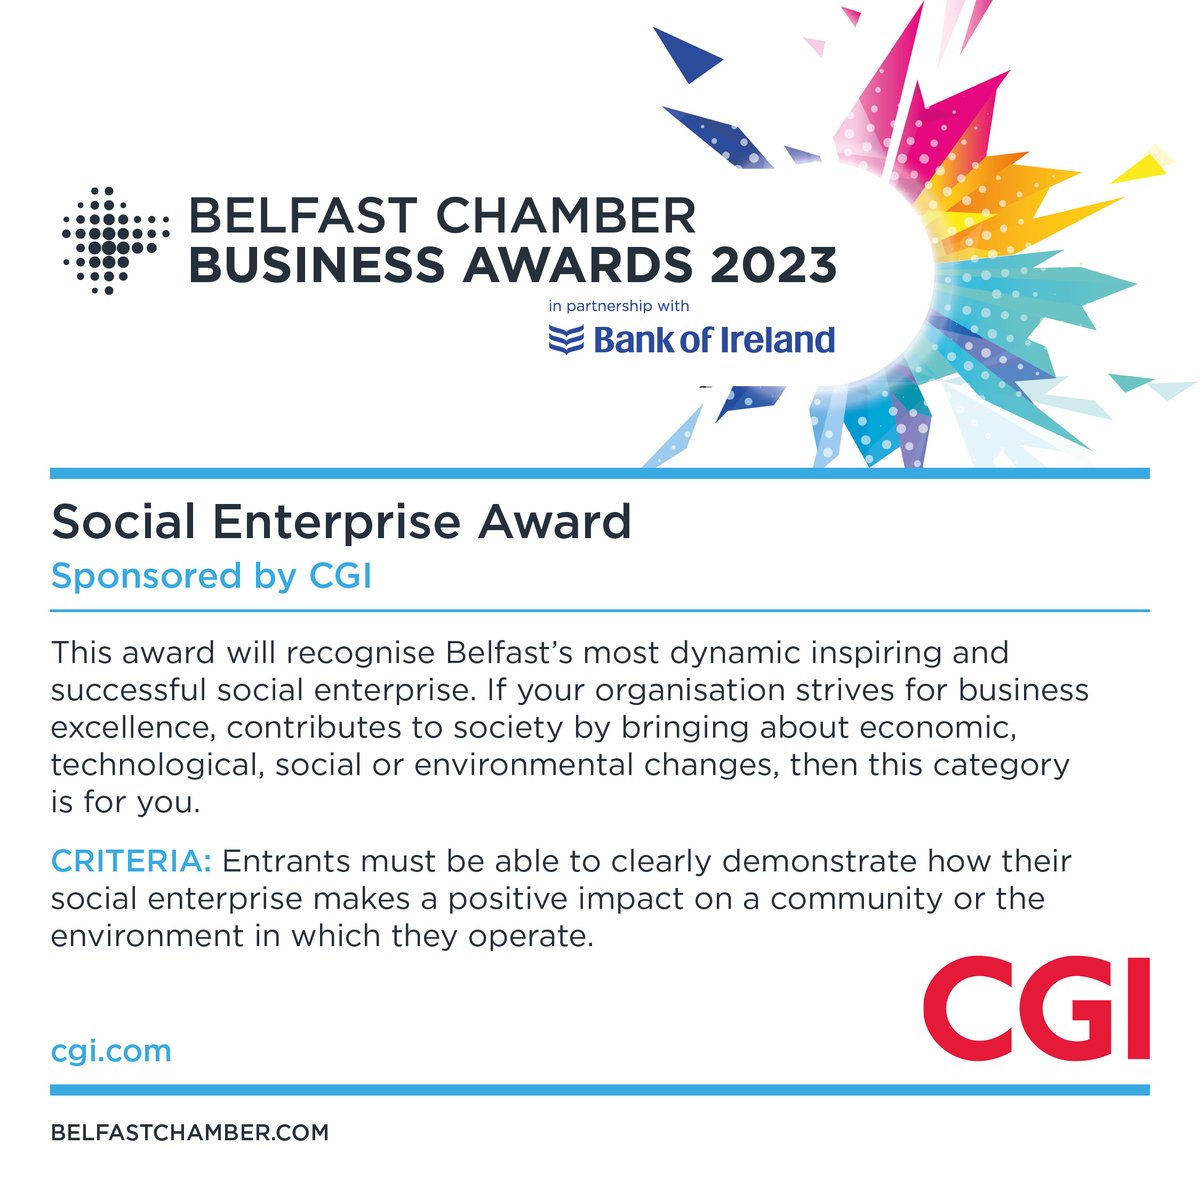 Calling all Social Enterprises! 🏆

#BelfastChamberBusinessAwards are closing soon for entries! Get your business recognised as the most dynamic & inspiring successful social enterprise.

To apply for the Social Enterprise award, visit belfastchamber.com/categories/

Deadline: 8th Sept